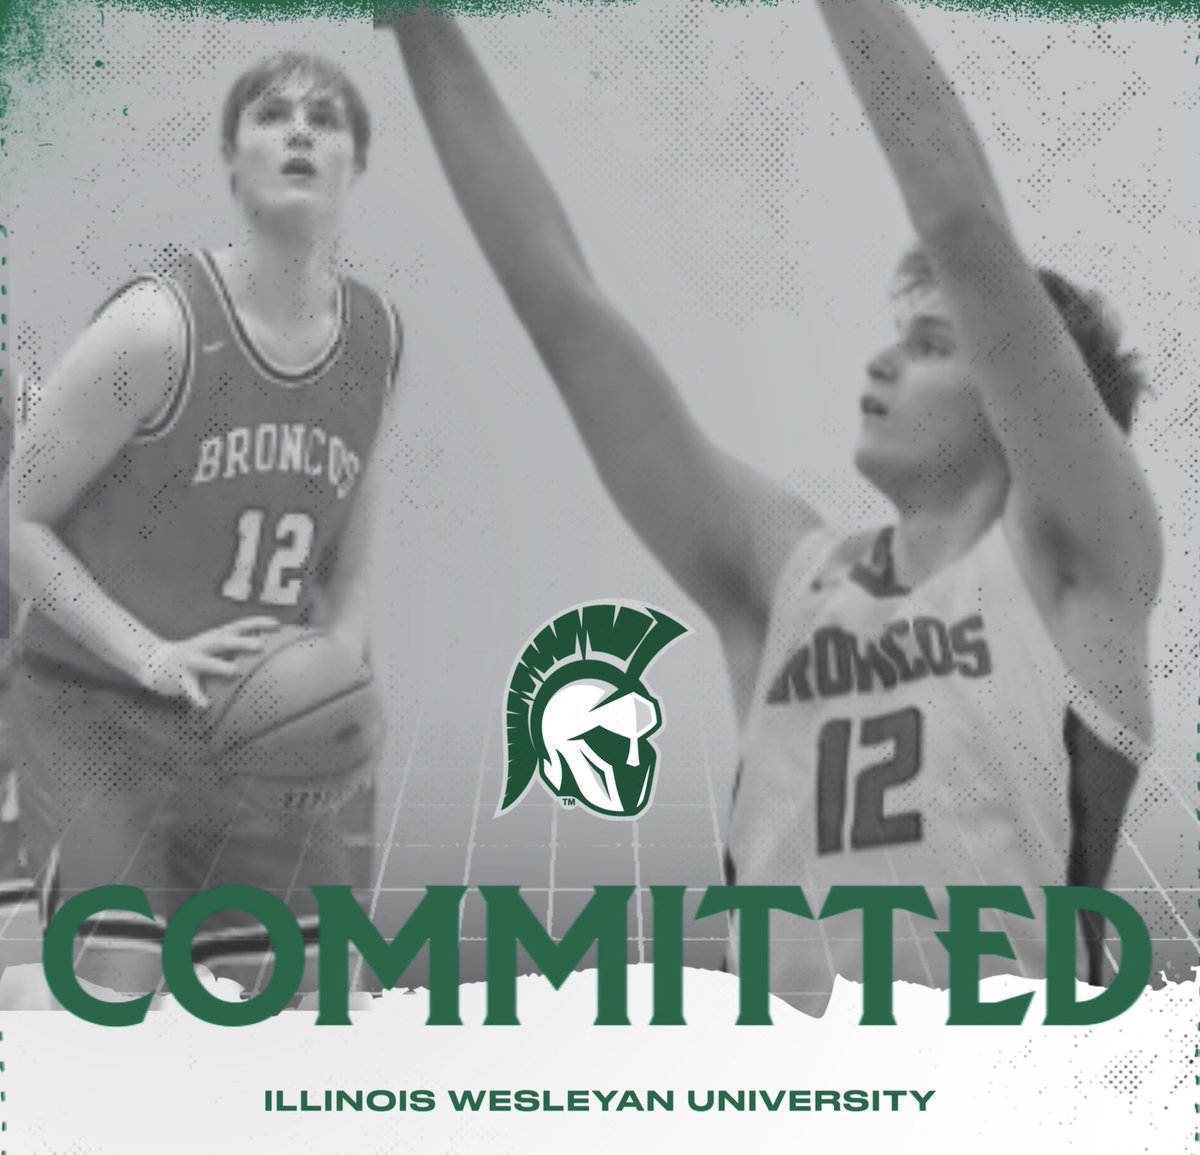 I’m super excited to announce my commitment to play basketball at Illinois Wesleyan University! I’m very grateful for Coach Rose, @CoachAndyE , and the entire coaching staff at @IWUBasketball for giving me this opportunity. GO TITANS!! 🟢⚪️